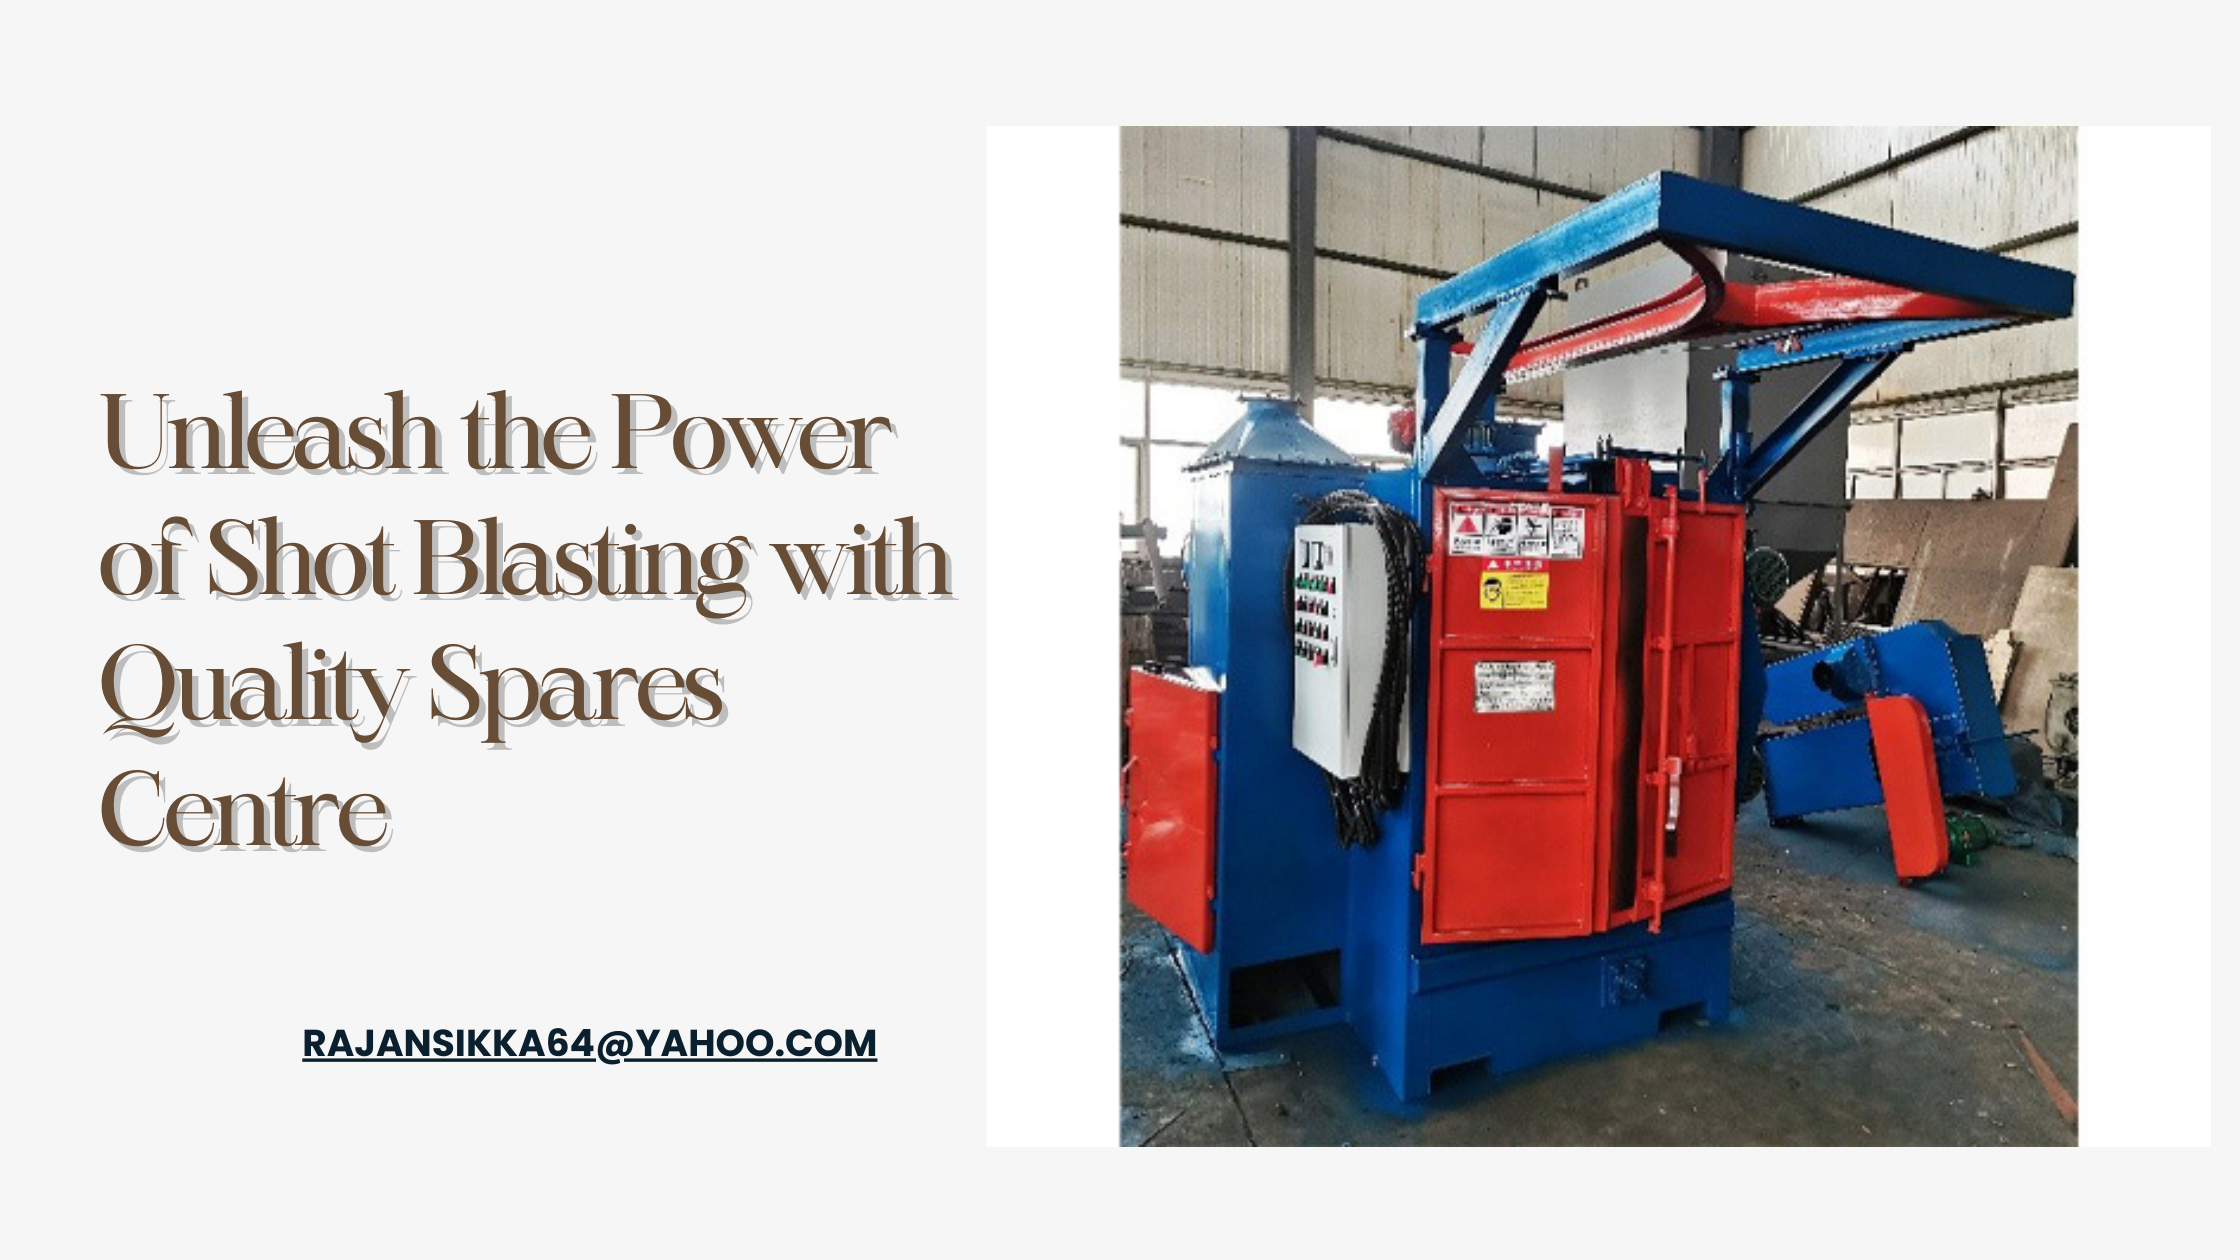 Unleash the Power of Shot Blasting with Quality Spares Centre